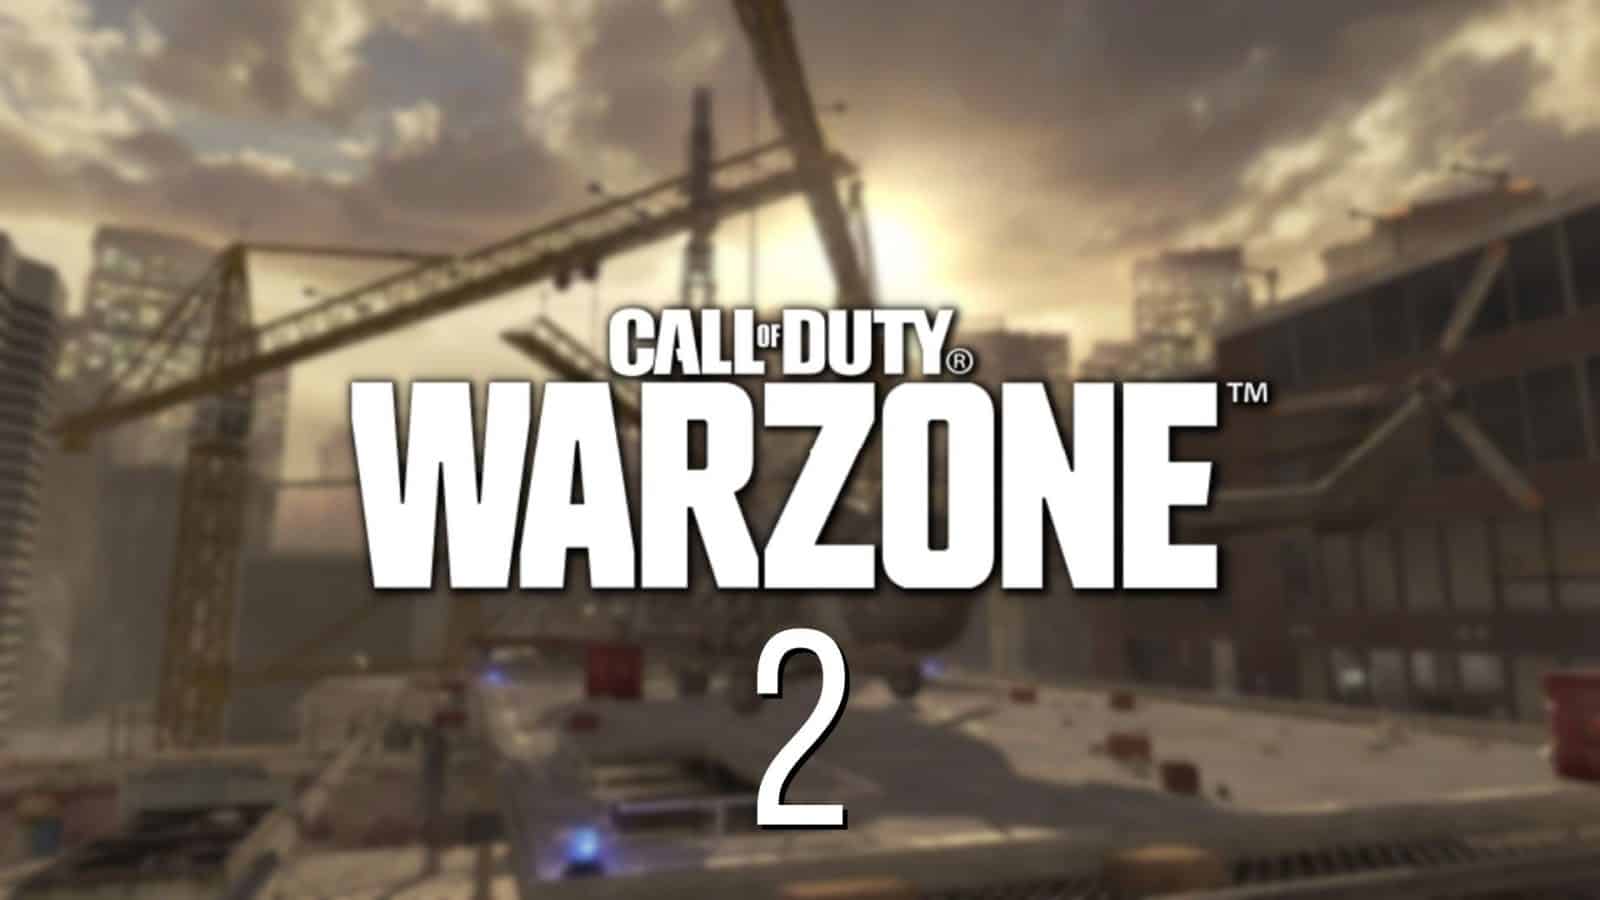 Call of Duty: Warzone is getting a new map, but some old maps will